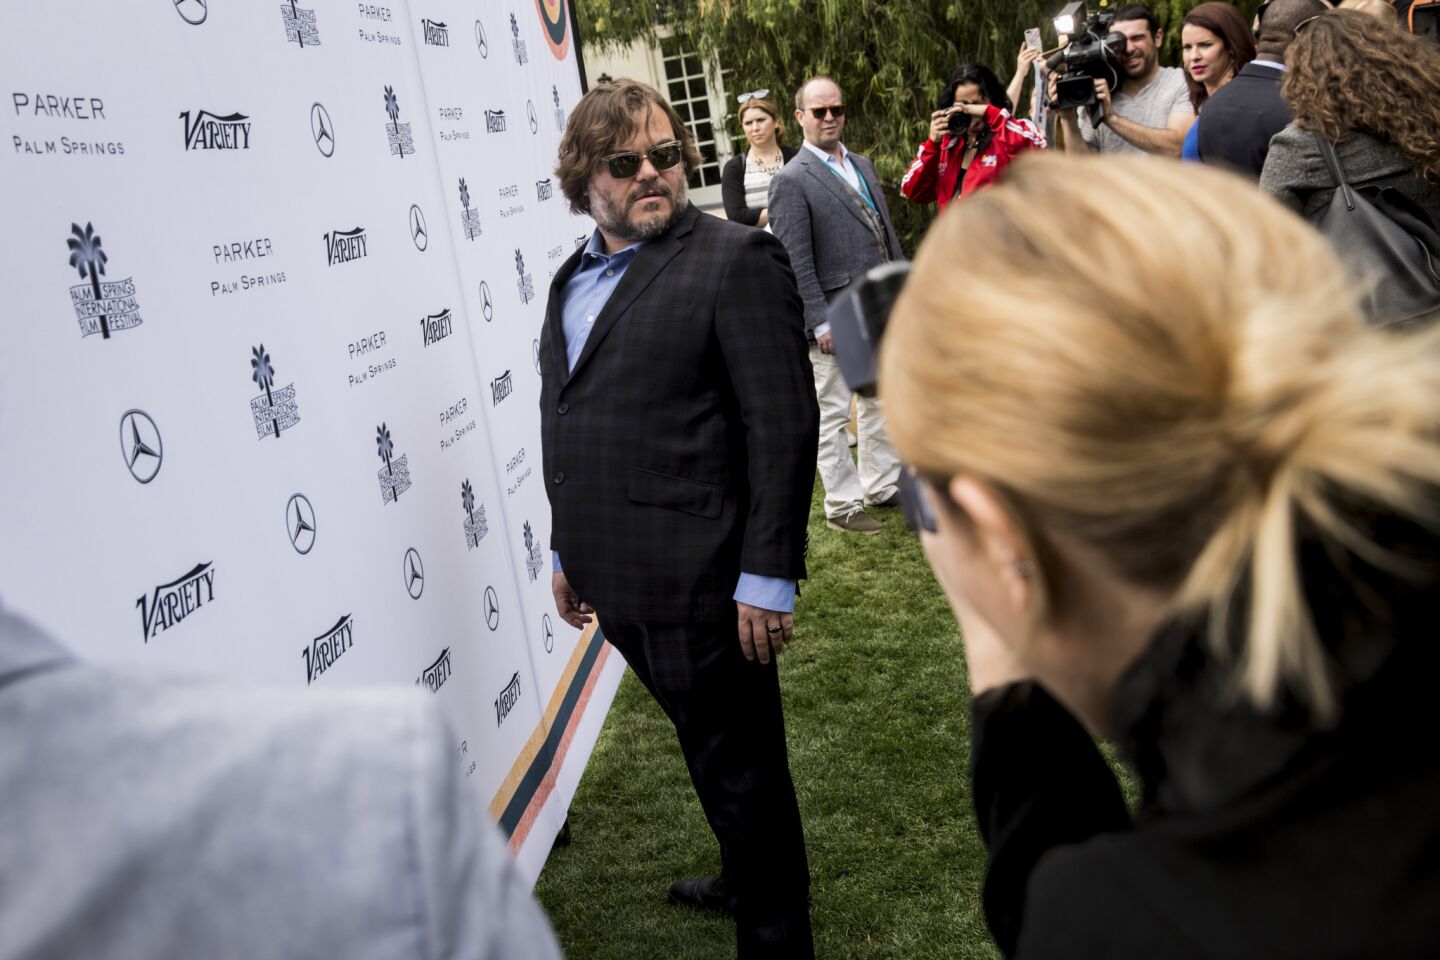 Actor Jack Black gives the photographers a different angle to shoot before the start of the Variety magazine luncheon.